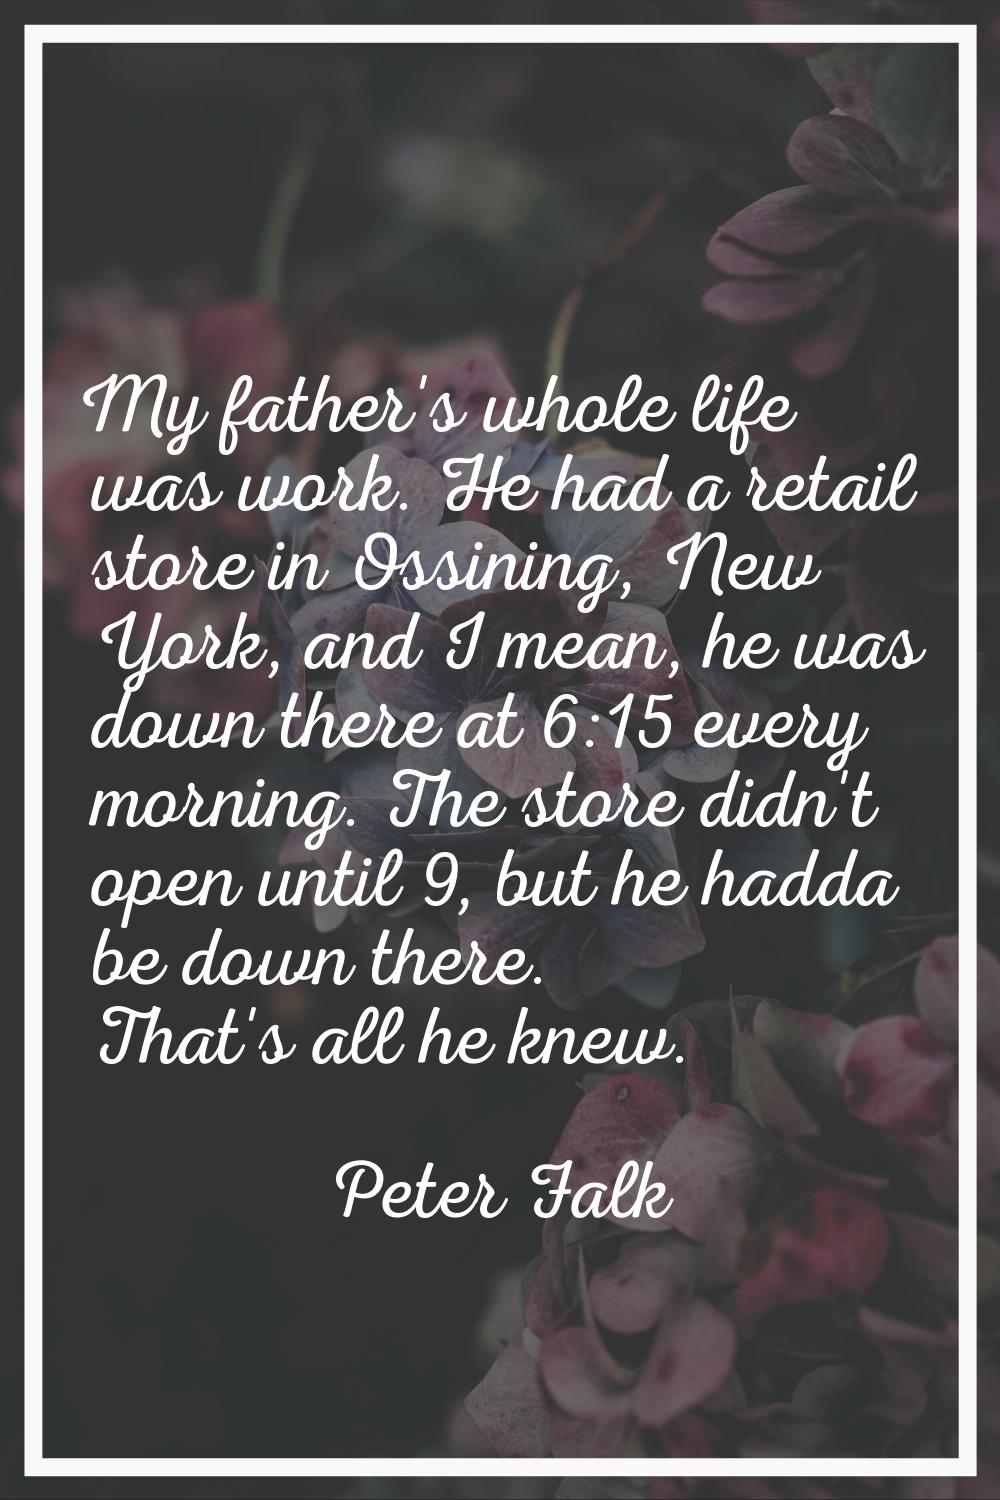 My father's whole life was work. He had a retail store in Ossining, New York, and I mean, he was do